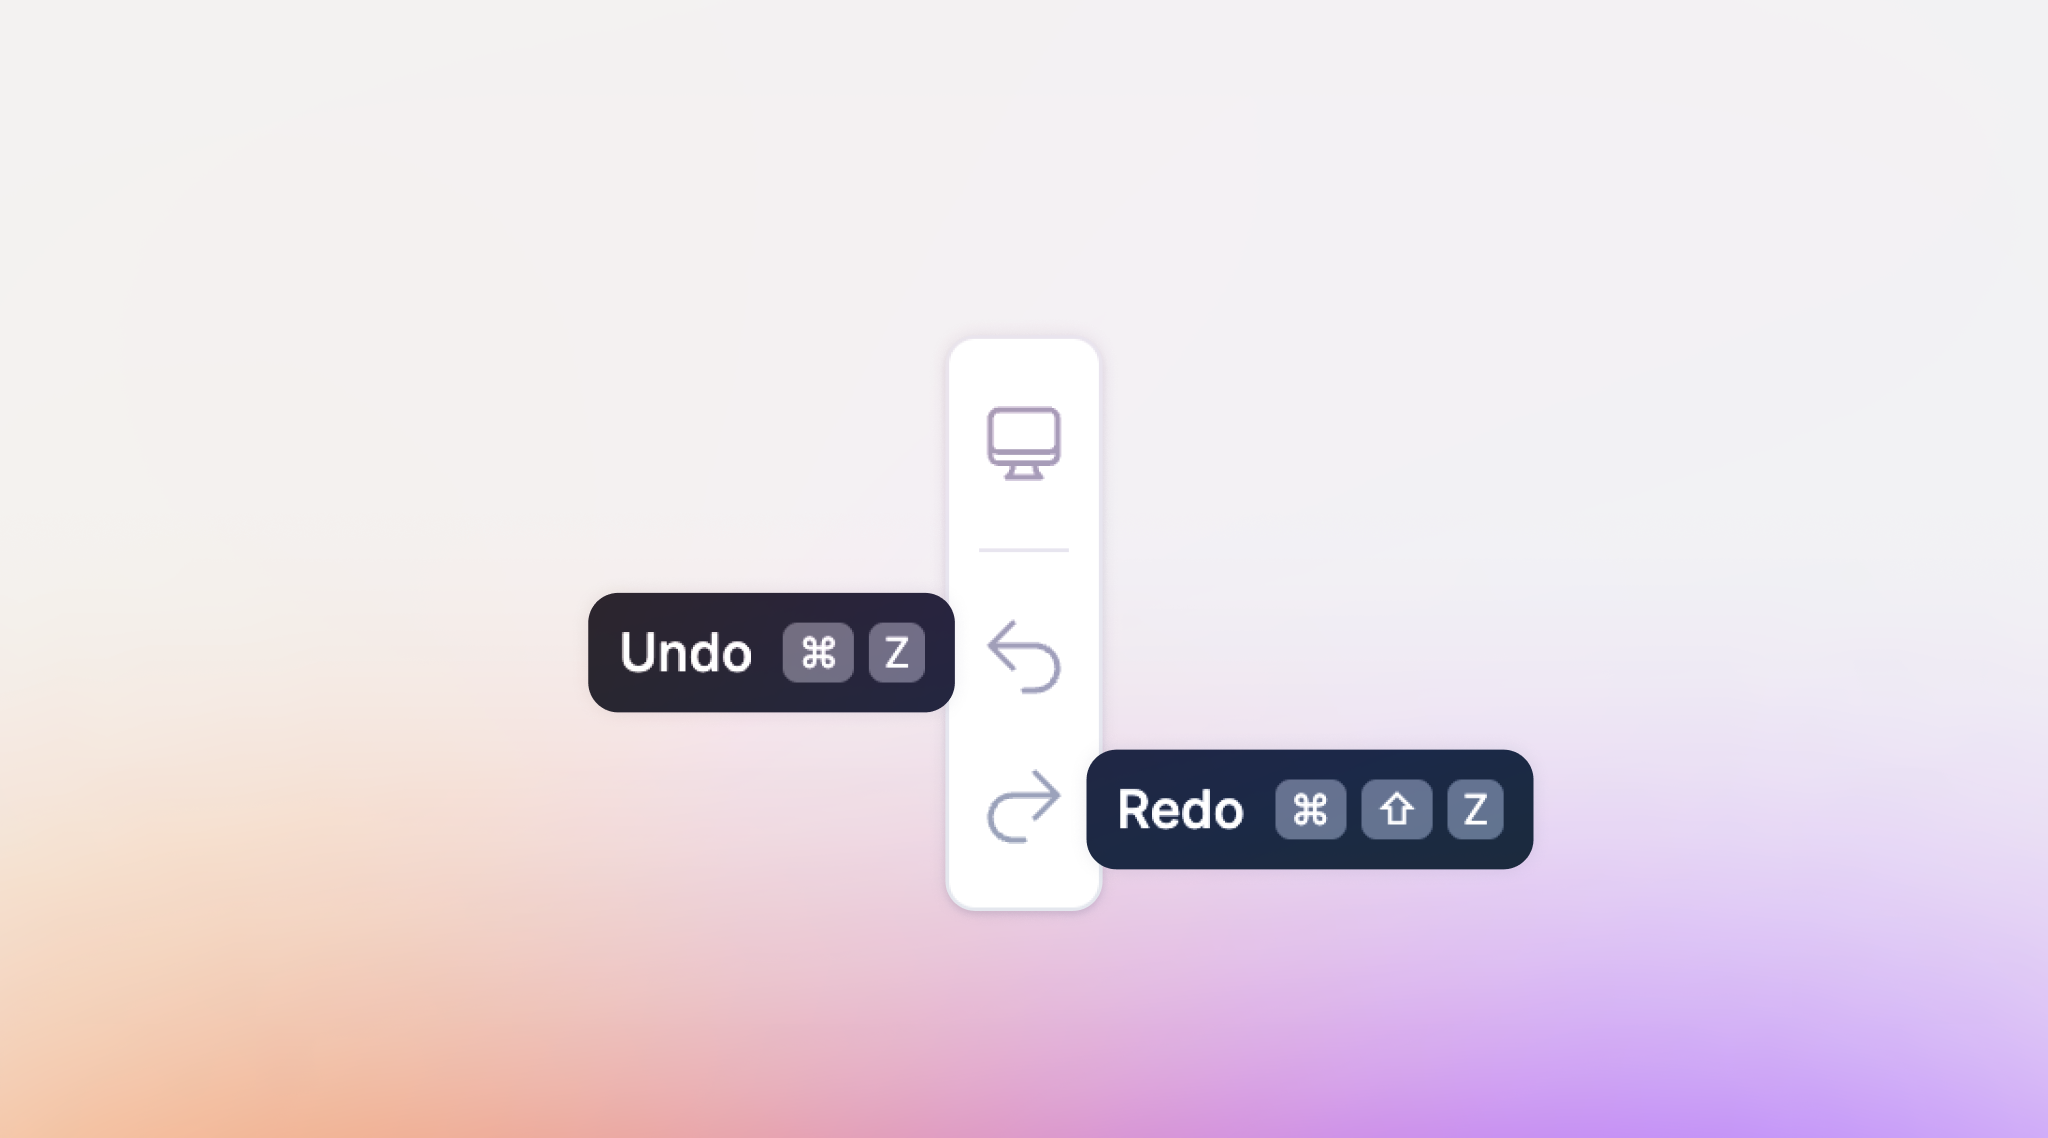 "Undo" feature just launched! ✨